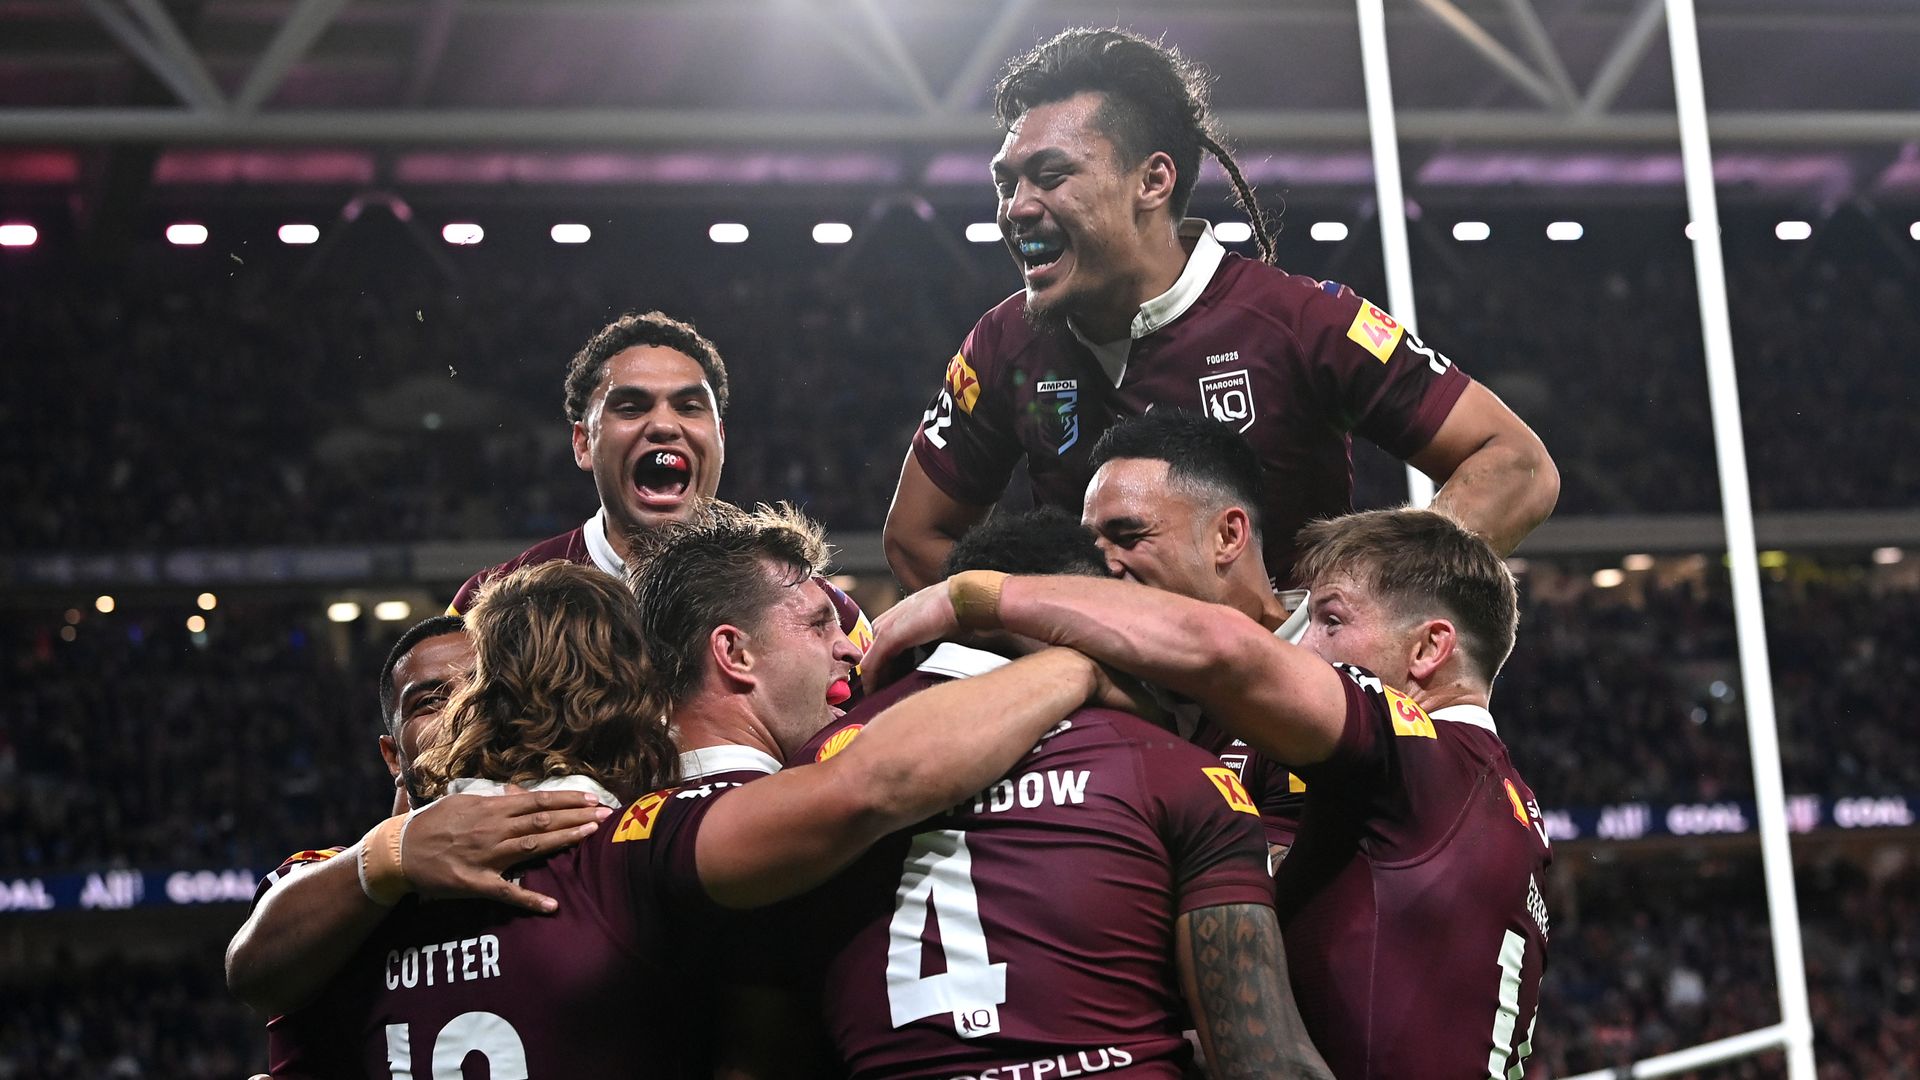 Queensland seal State of Origin series with NSW hammering